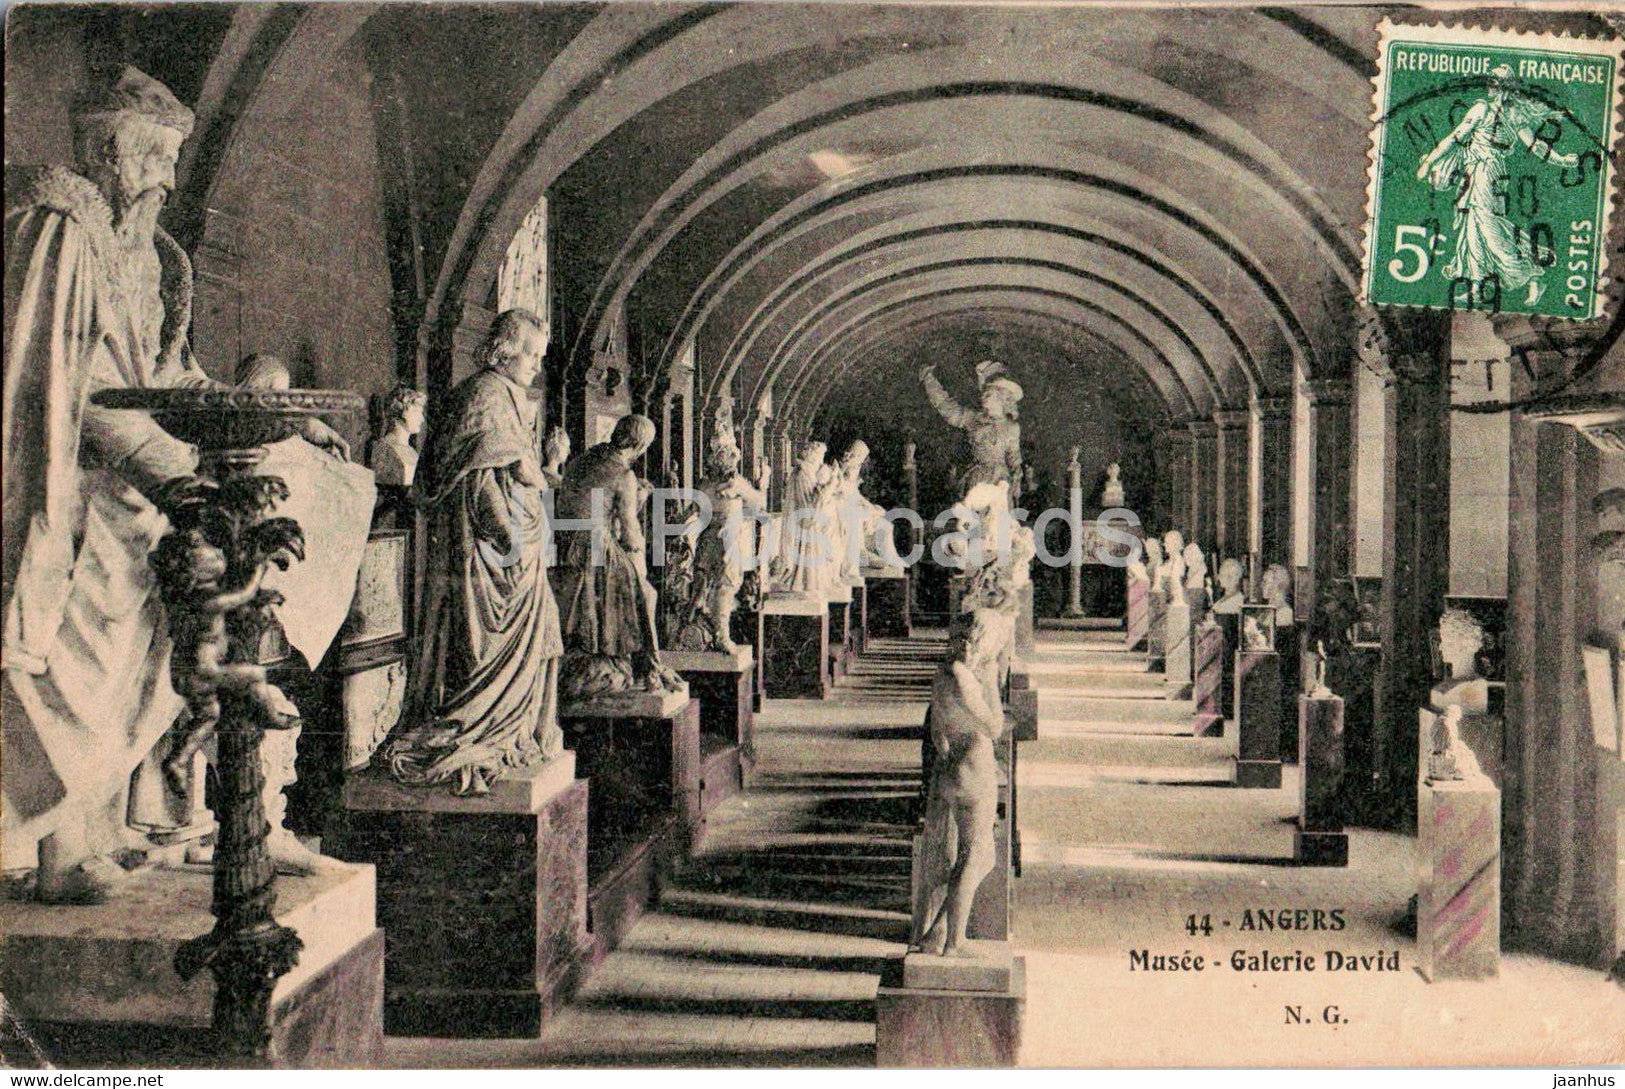 Angers - Musee - Galerie David - museum - 44 - old postcard - 1909 - France - used - JH Postcards